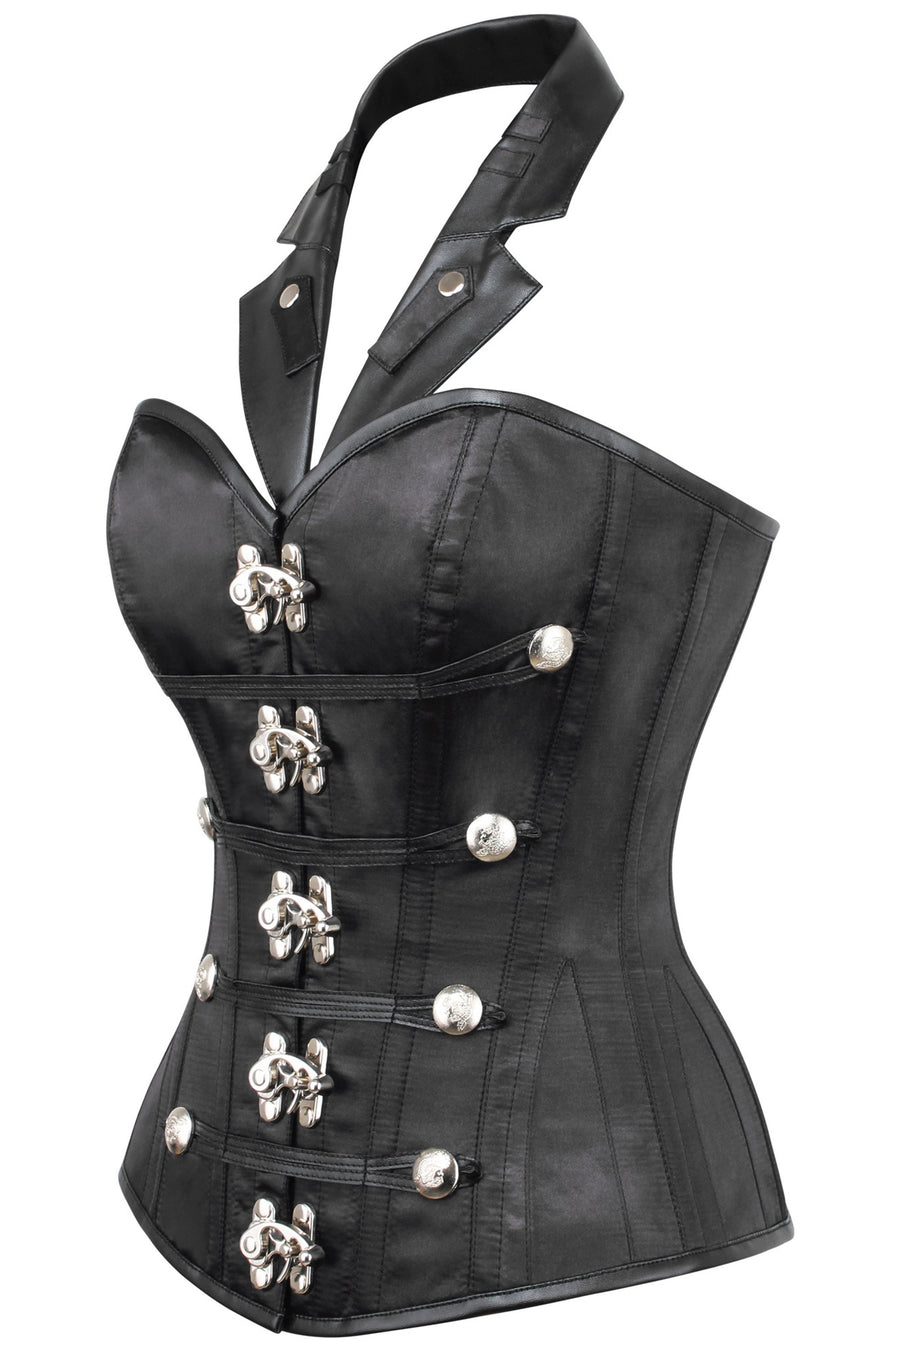 Black with White Binding Corset Top